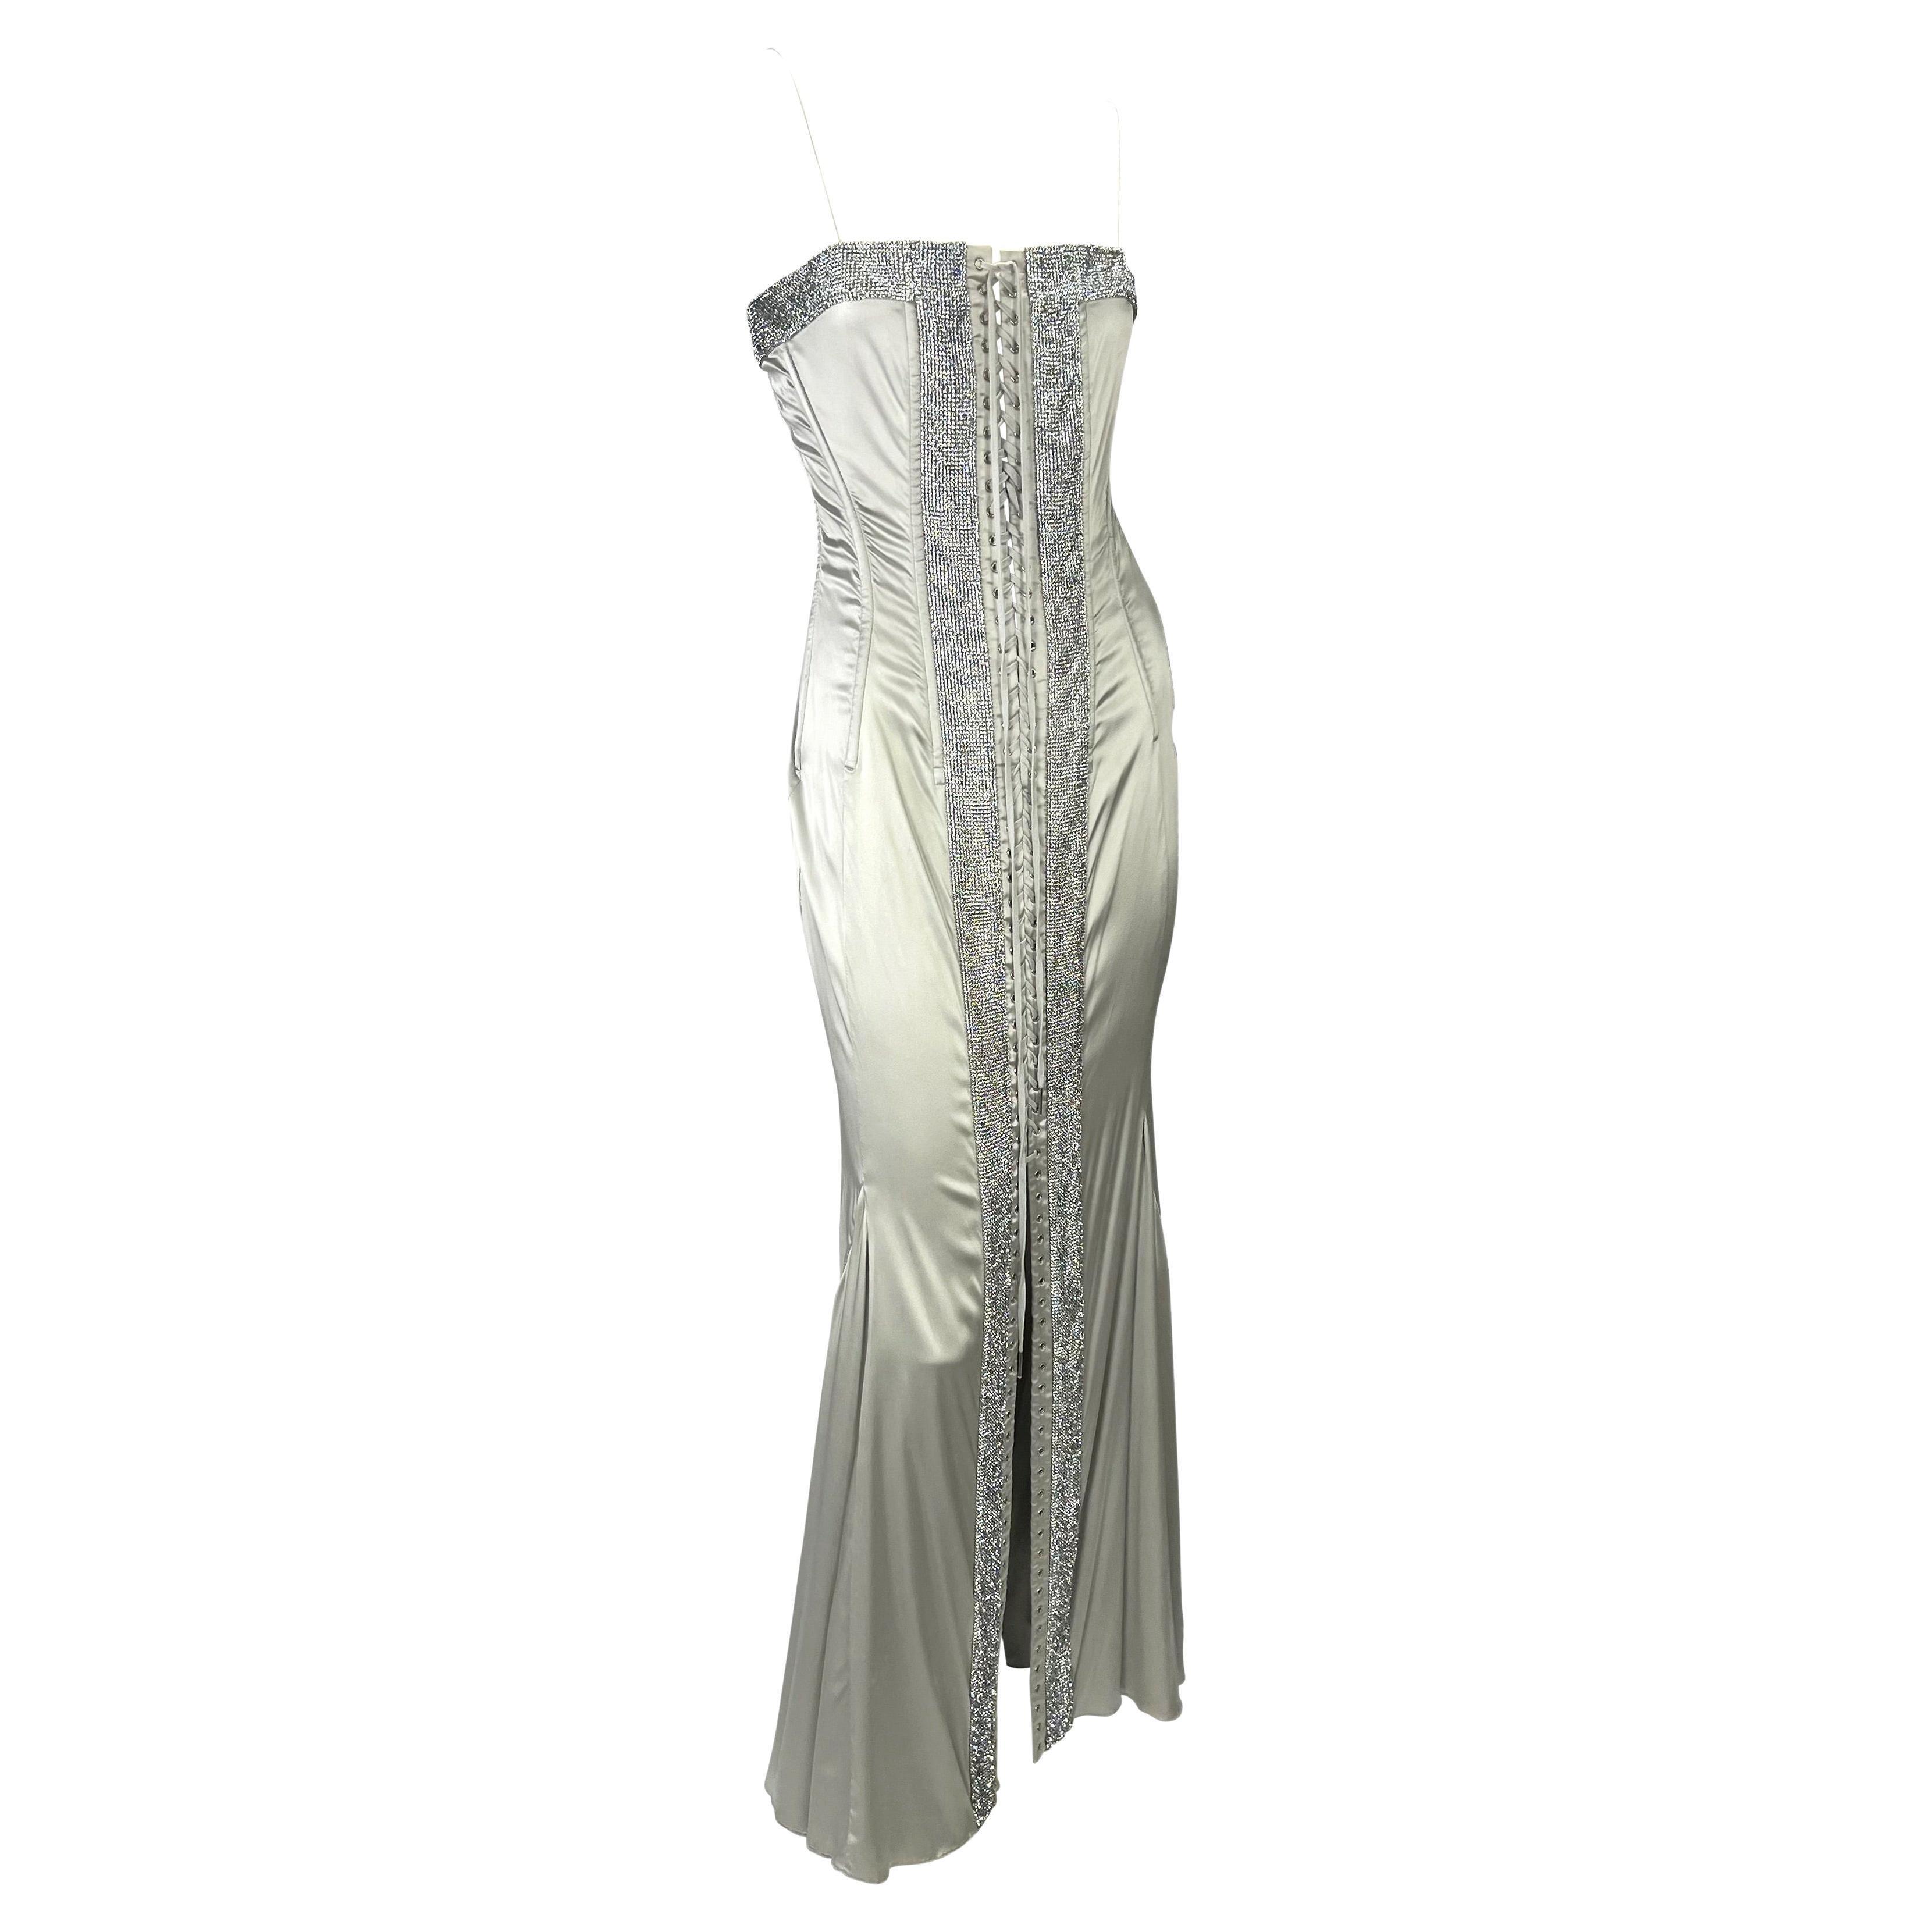 S/S 2004 Dolce & Gabbana Runway Rhinestone Lace-Up Silver Stretch Satin Gown 9